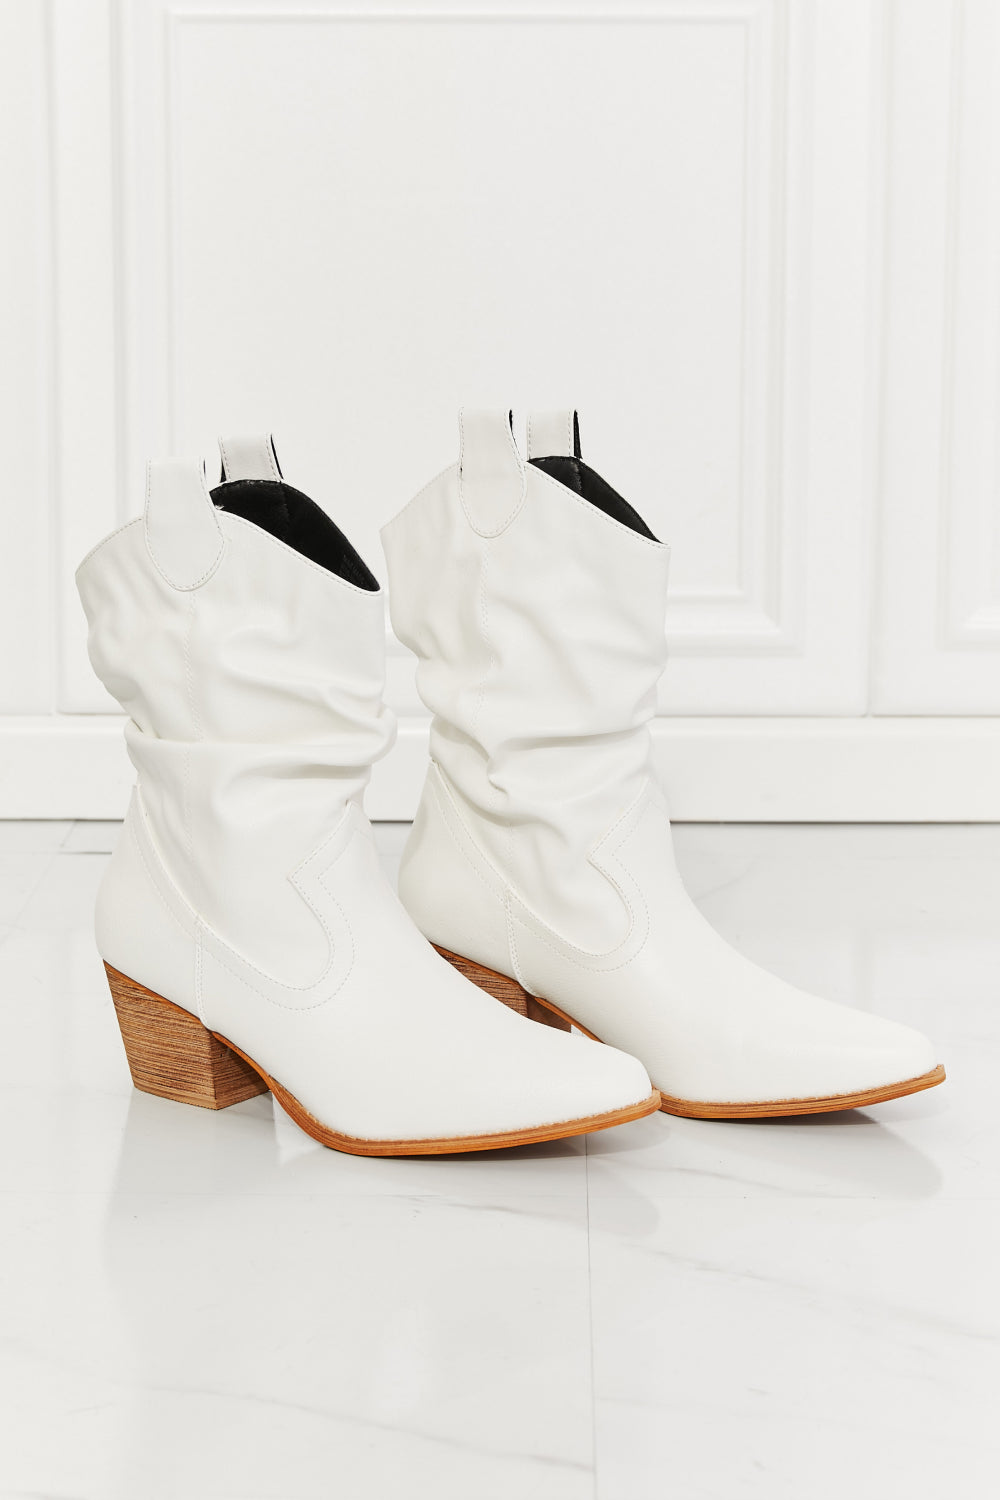 MMShoes Better in Texas Scrunch Cowboy Boots in White - AllIn Computer